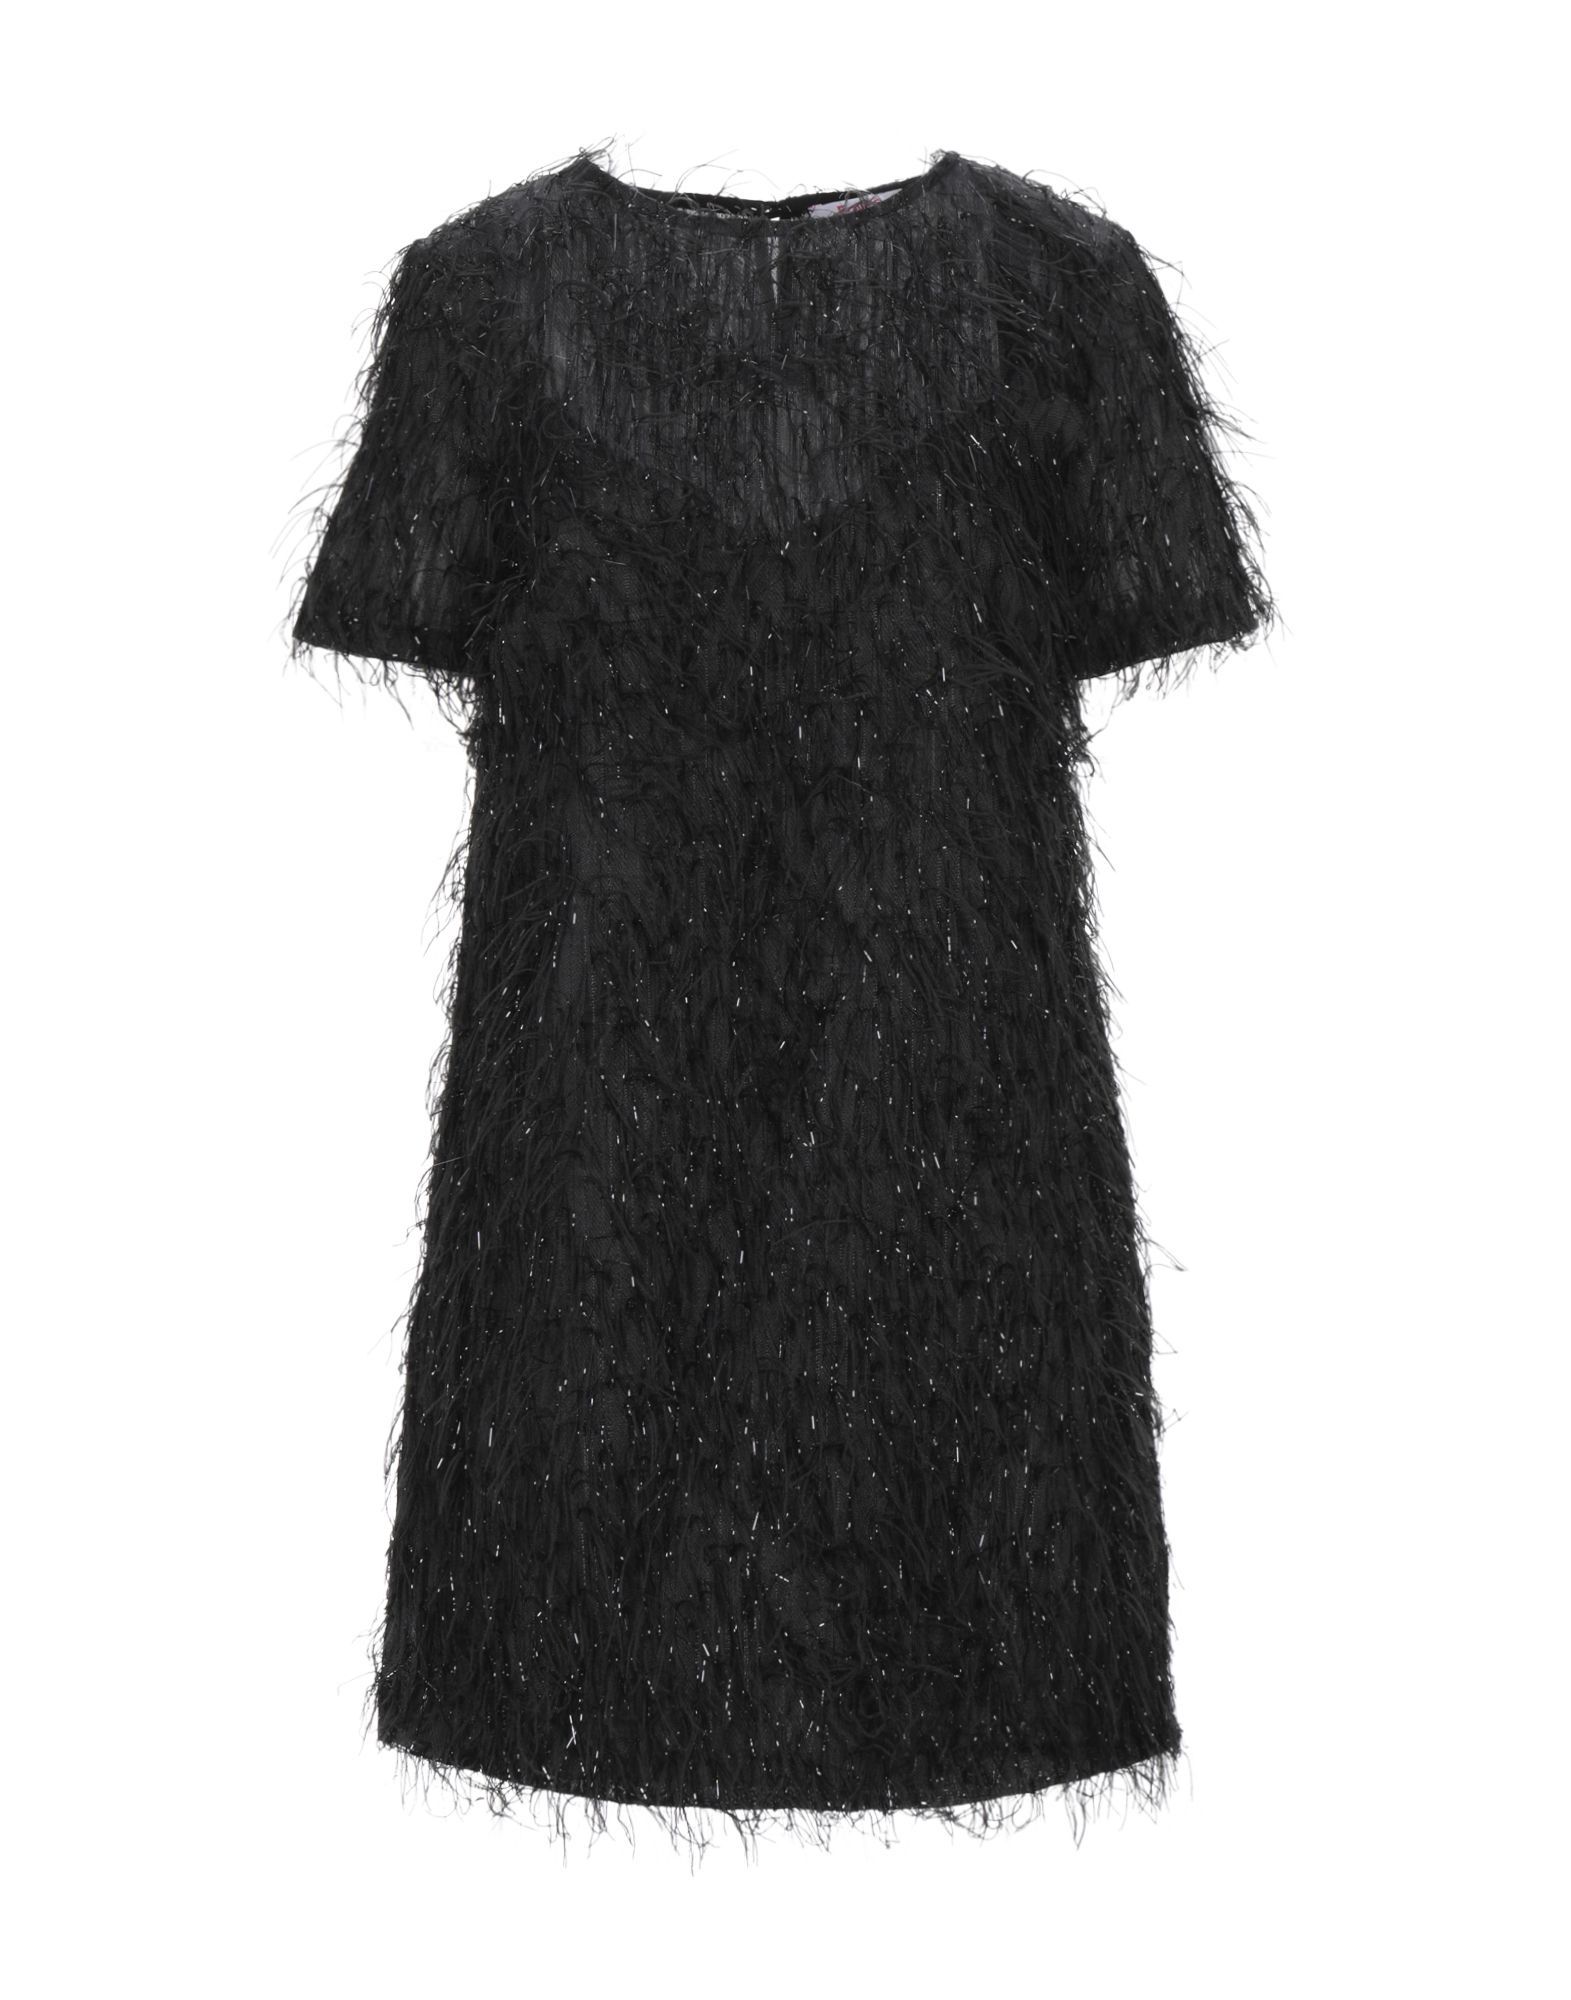 crepe, lamé, fringed, solid colour, round collar, short sleeves, no pockets, rear closure, button closing, internal slip dress